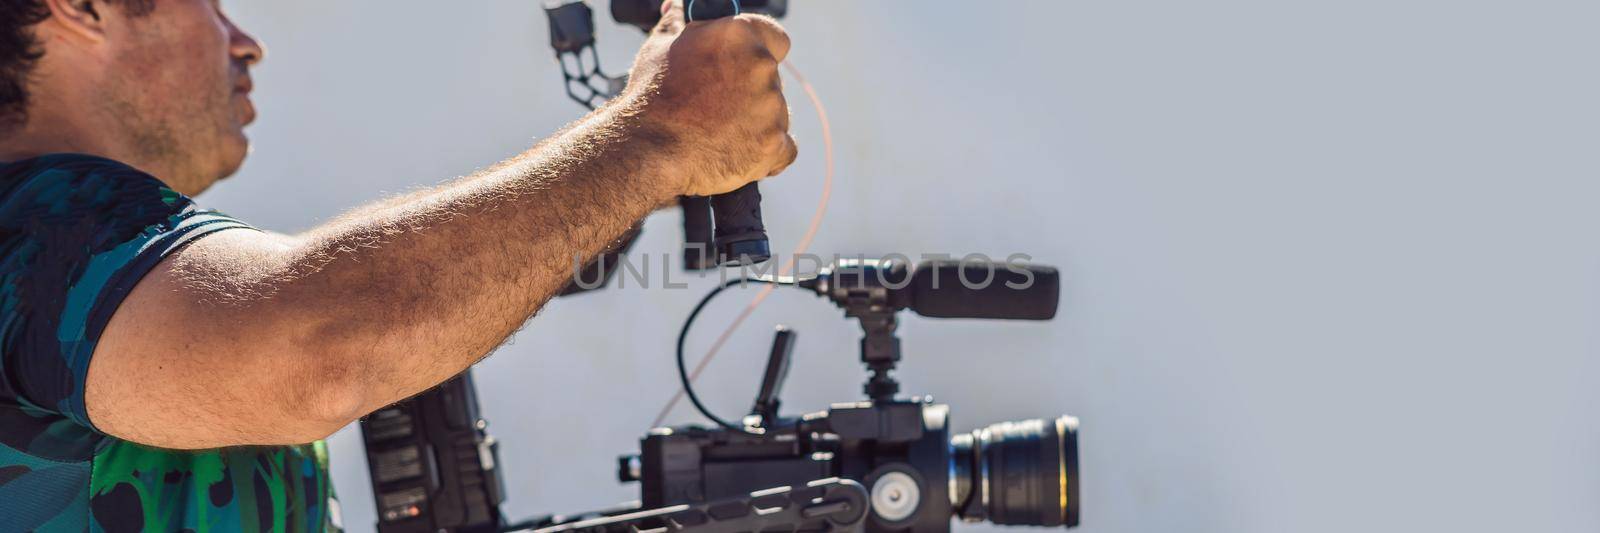 Steadicam operator and his assistant prepare camera and 3-axis stabilizer-gimbal for a commercial shoot BANNER, LONG FORMAT by galitskaya